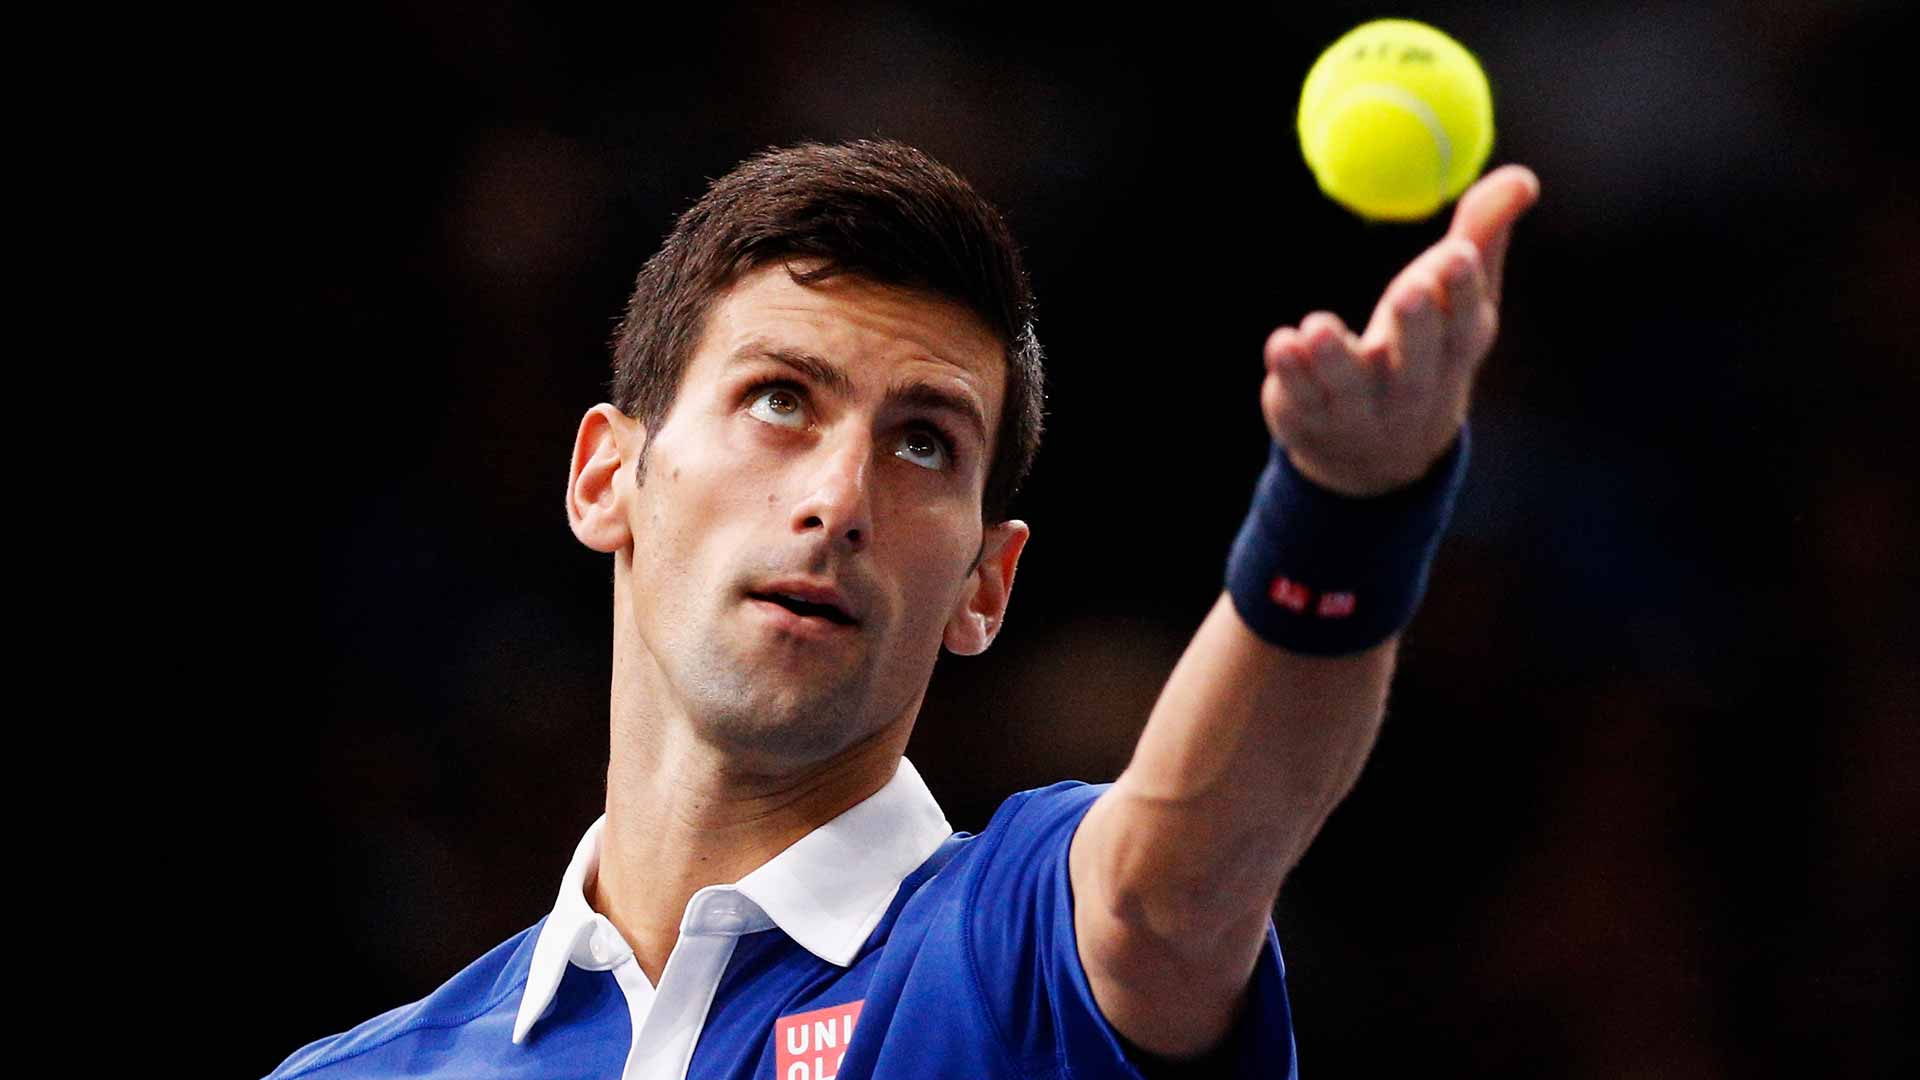 History Beckons As Djokovic Meets Murray For Paris Title